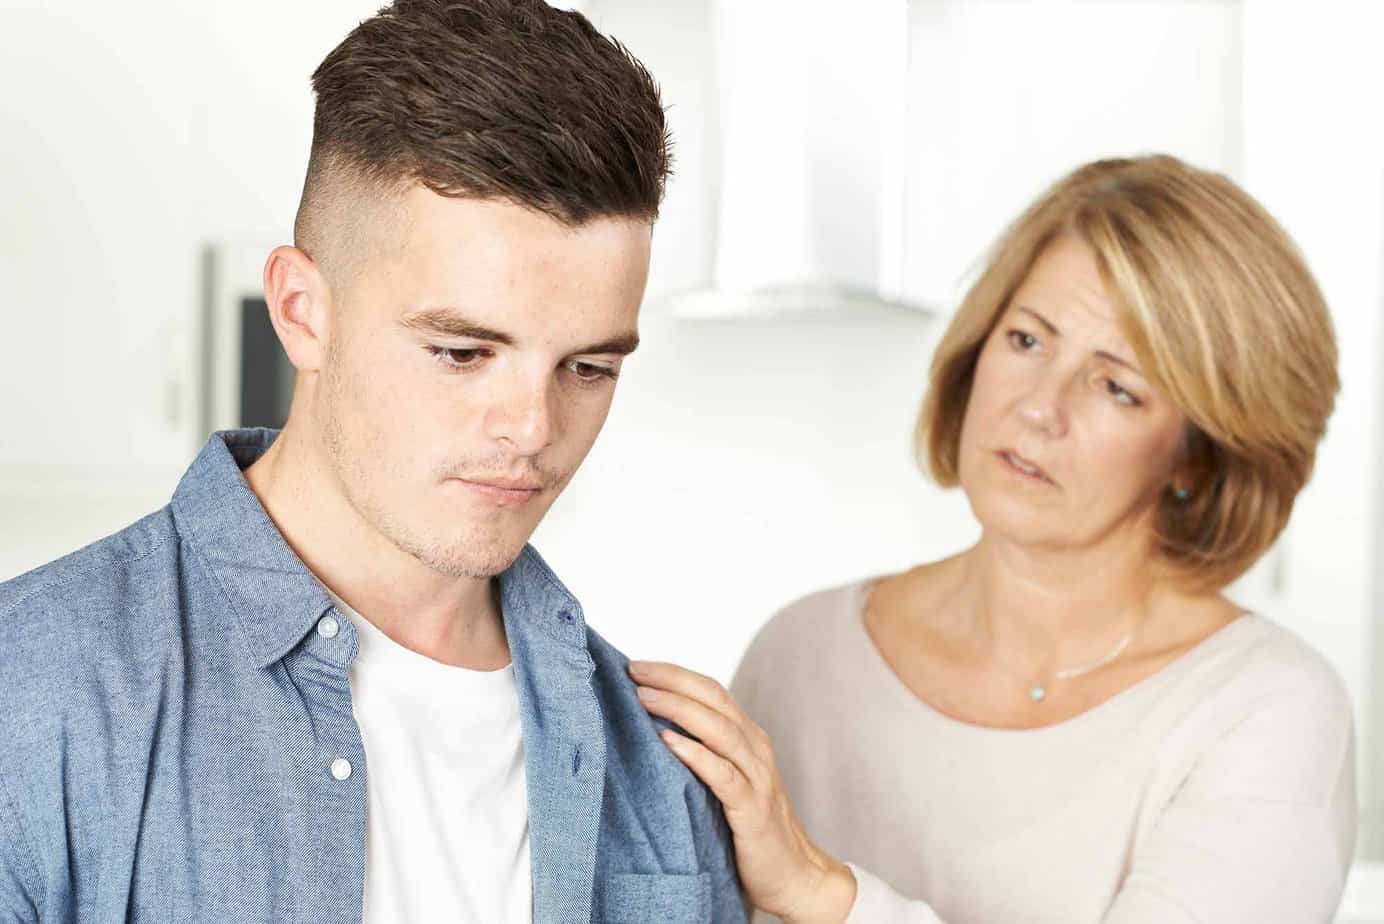 concerned mother talking to son about alcohol use